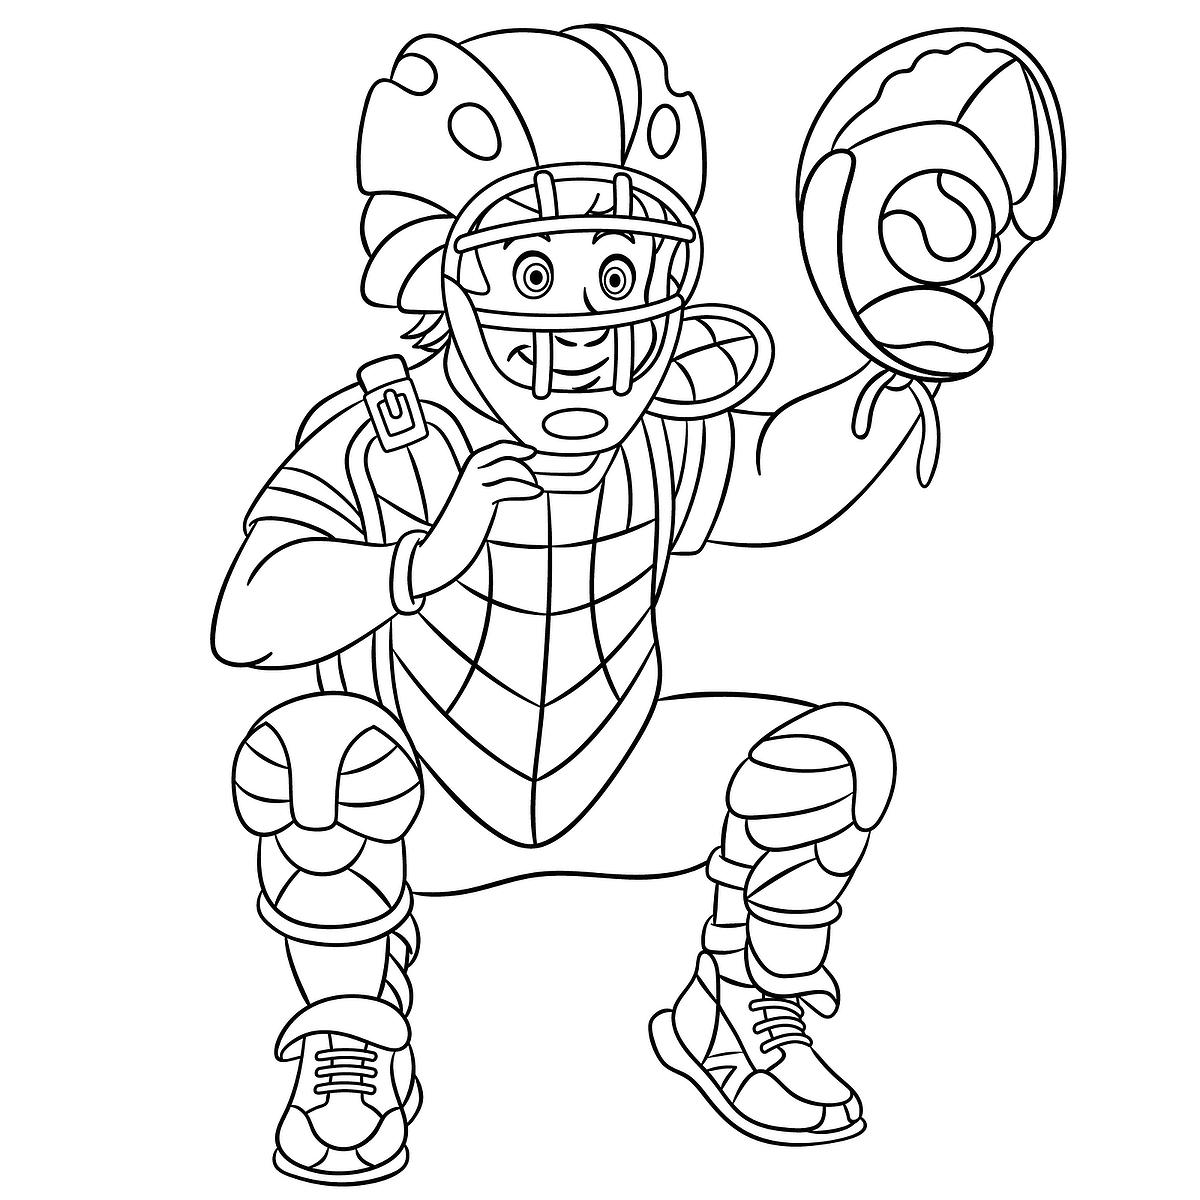 Baseball Coloring Pages for Kids: Fun ...